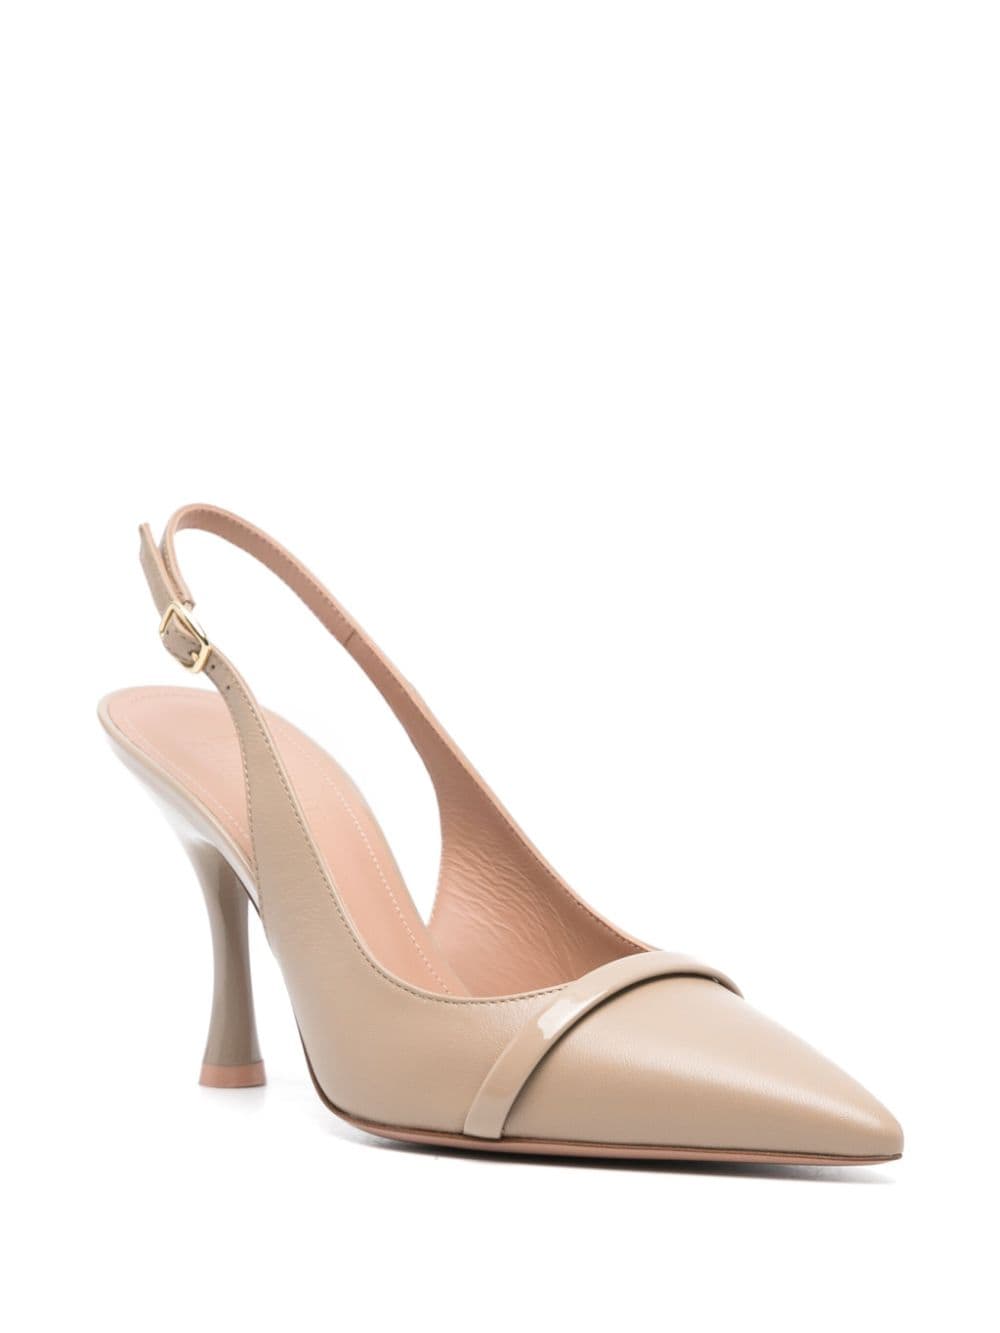 Malone Souliers Jama 95mm pointed-toe pumps - Beige